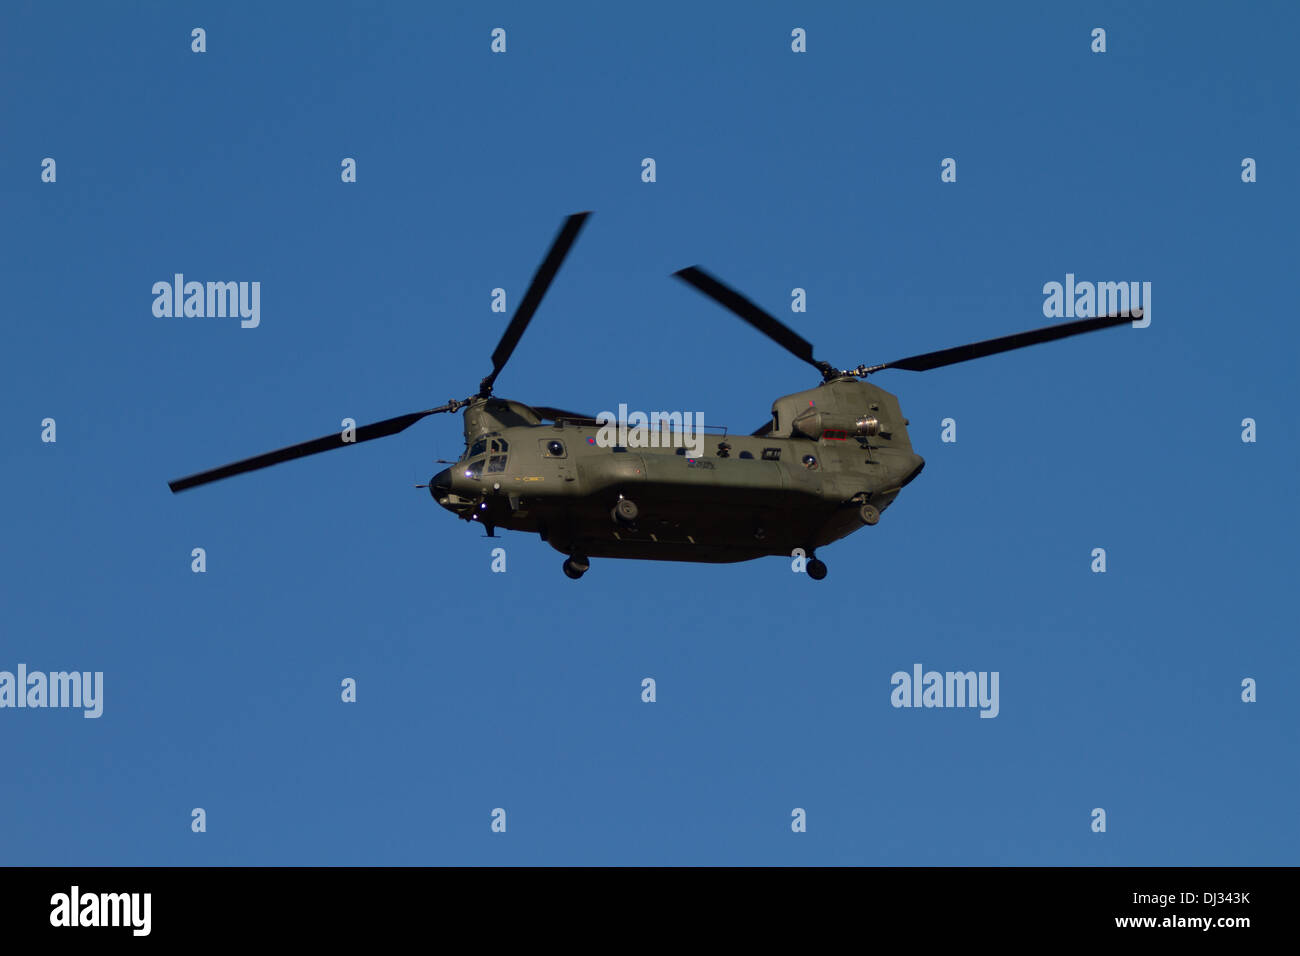 Boeing CH-47 Chinook Helicopter flying With A Blue Sky Stock Photo